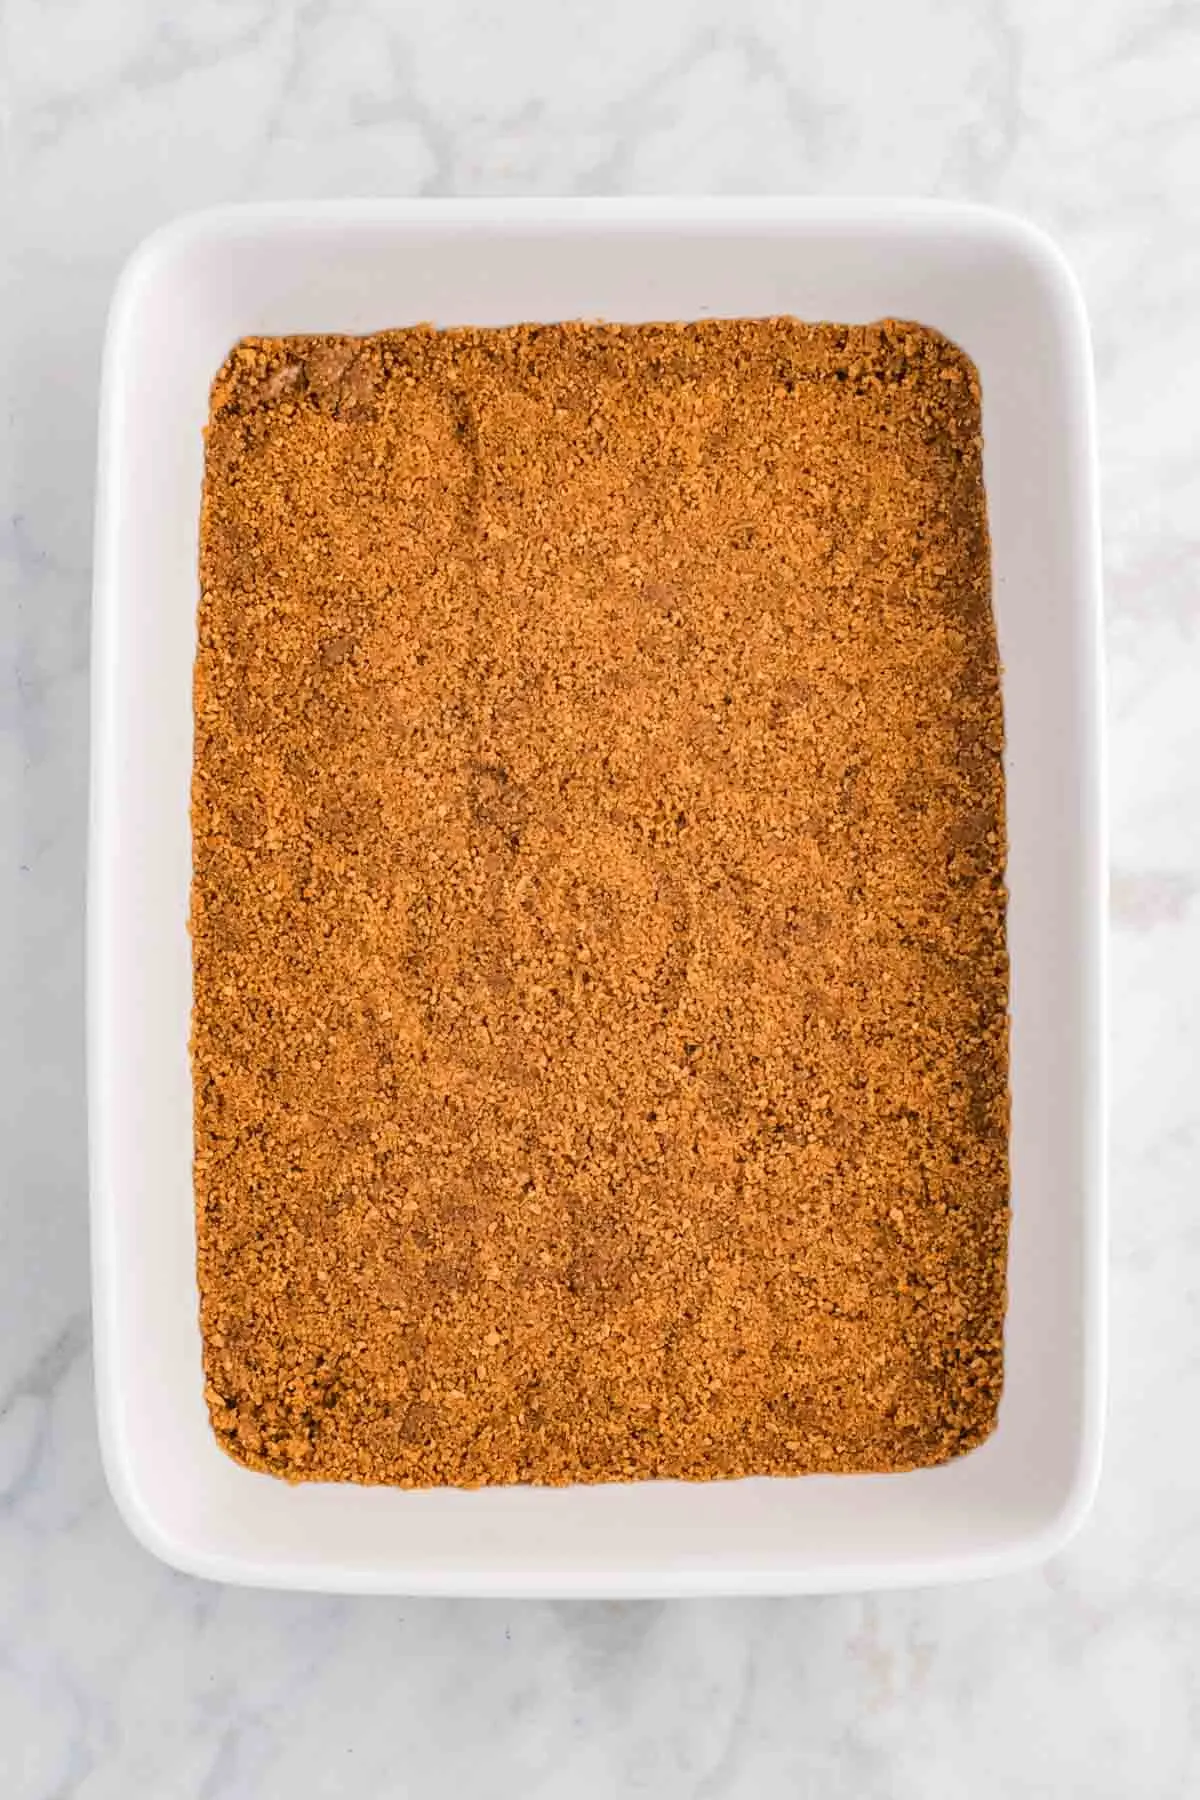 gingersnap crust in the bottom of a baking dish